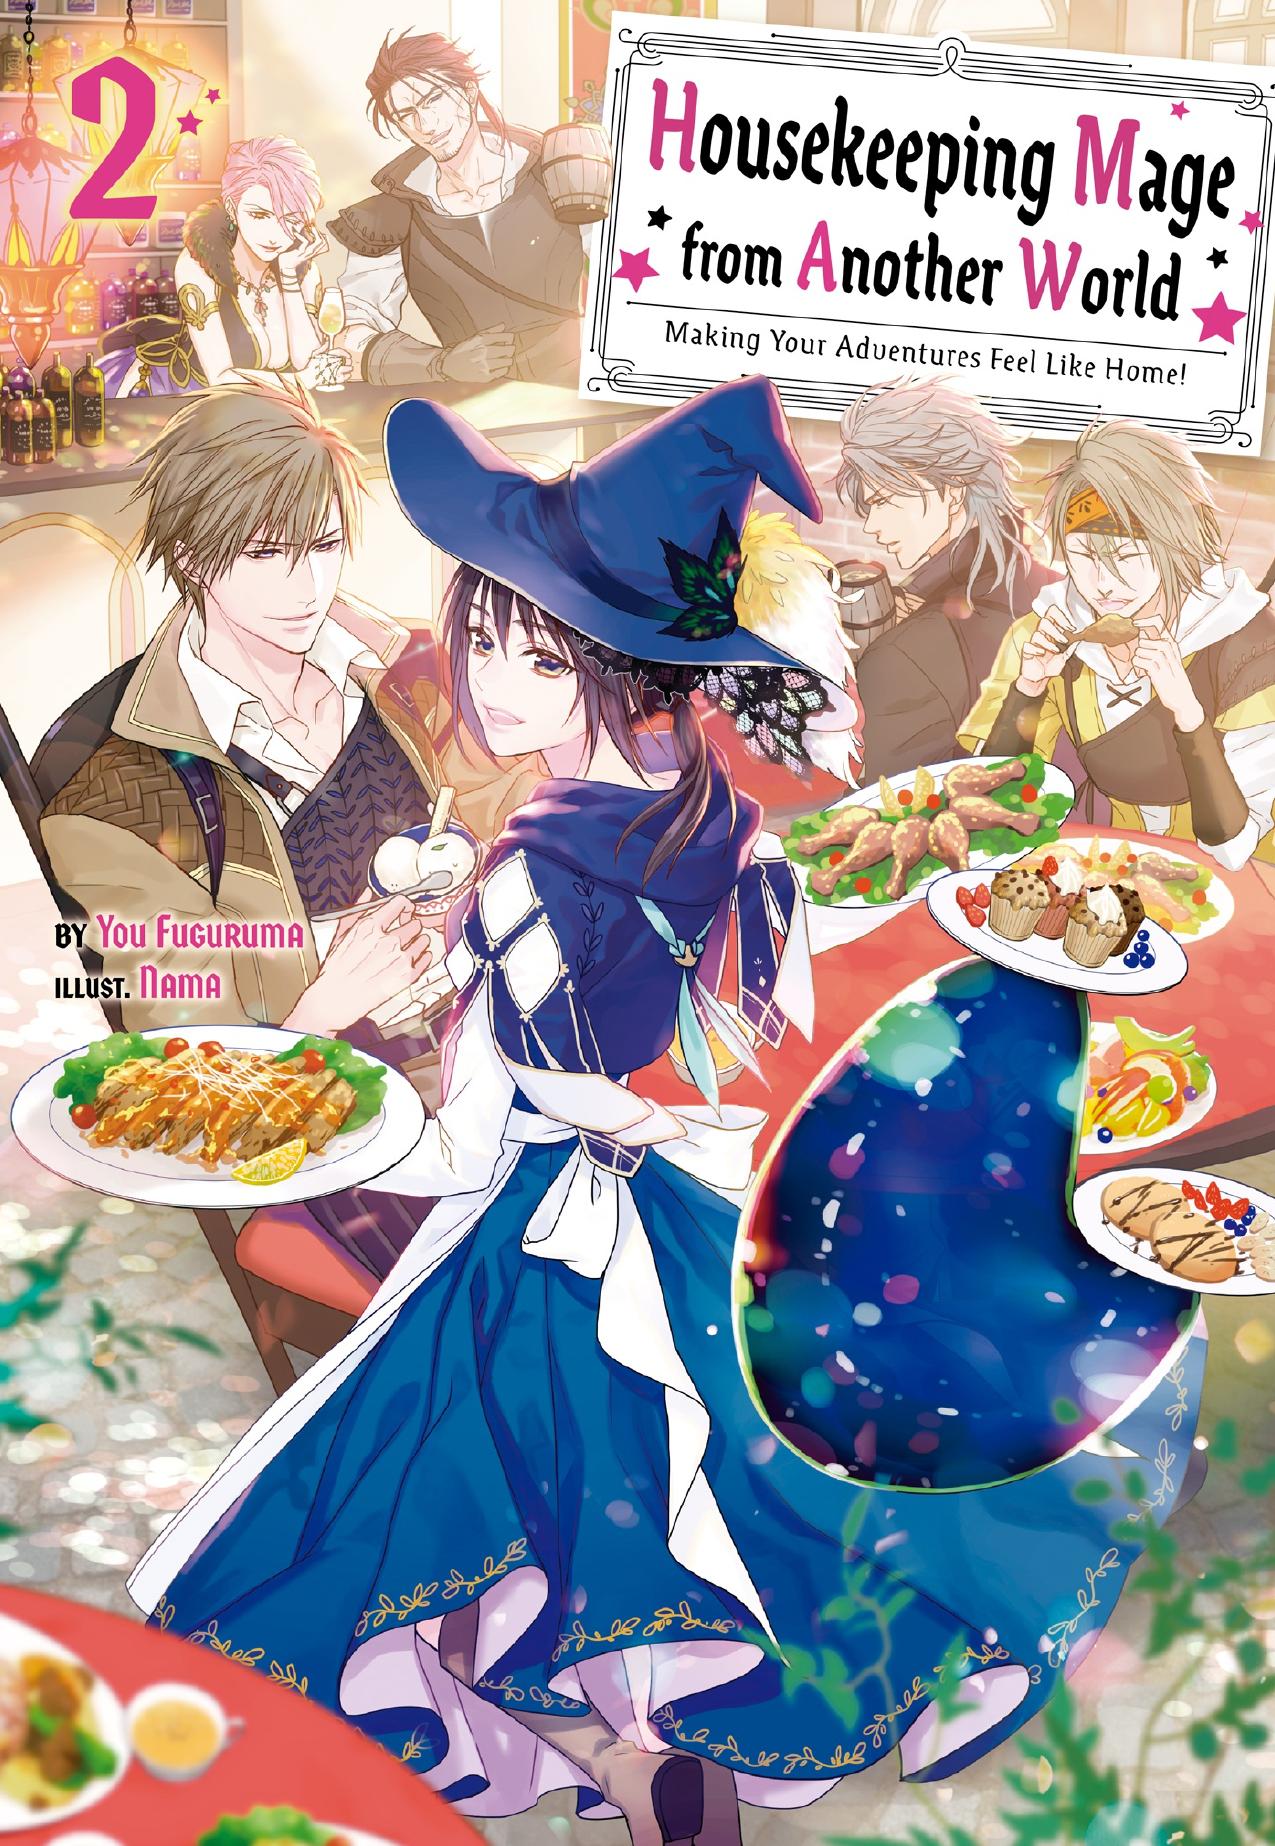 Housekeeping Mage from Another World: Making Your Adventures Feel Like Home! Volume 2 by You Fugurama